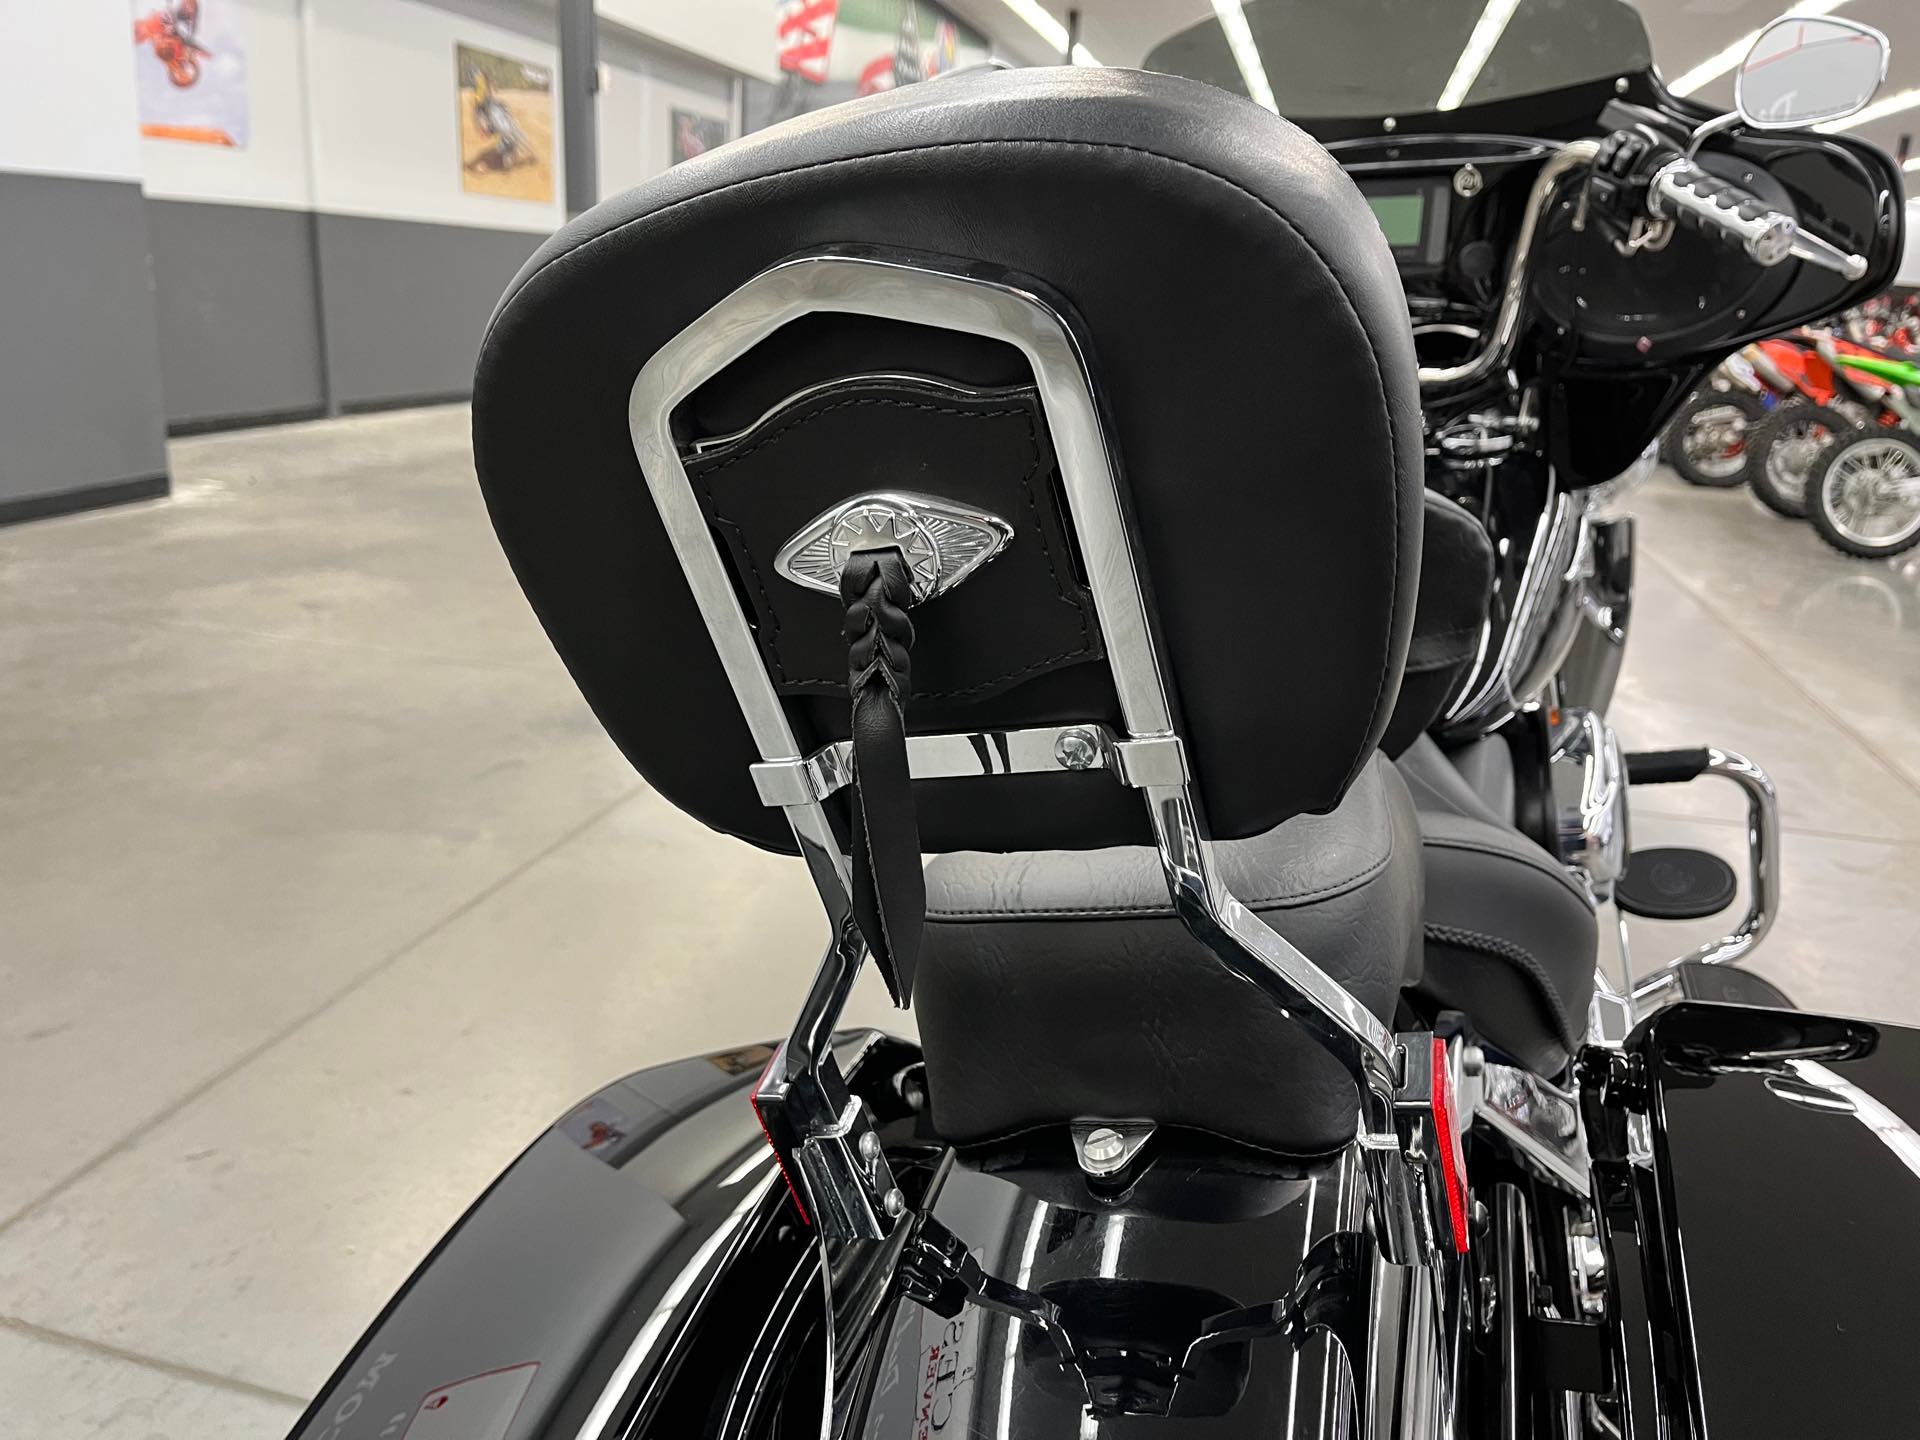 2015 Harley-Davidson Softail Heritage Softail Classic at Aces Motorcycles - Denver